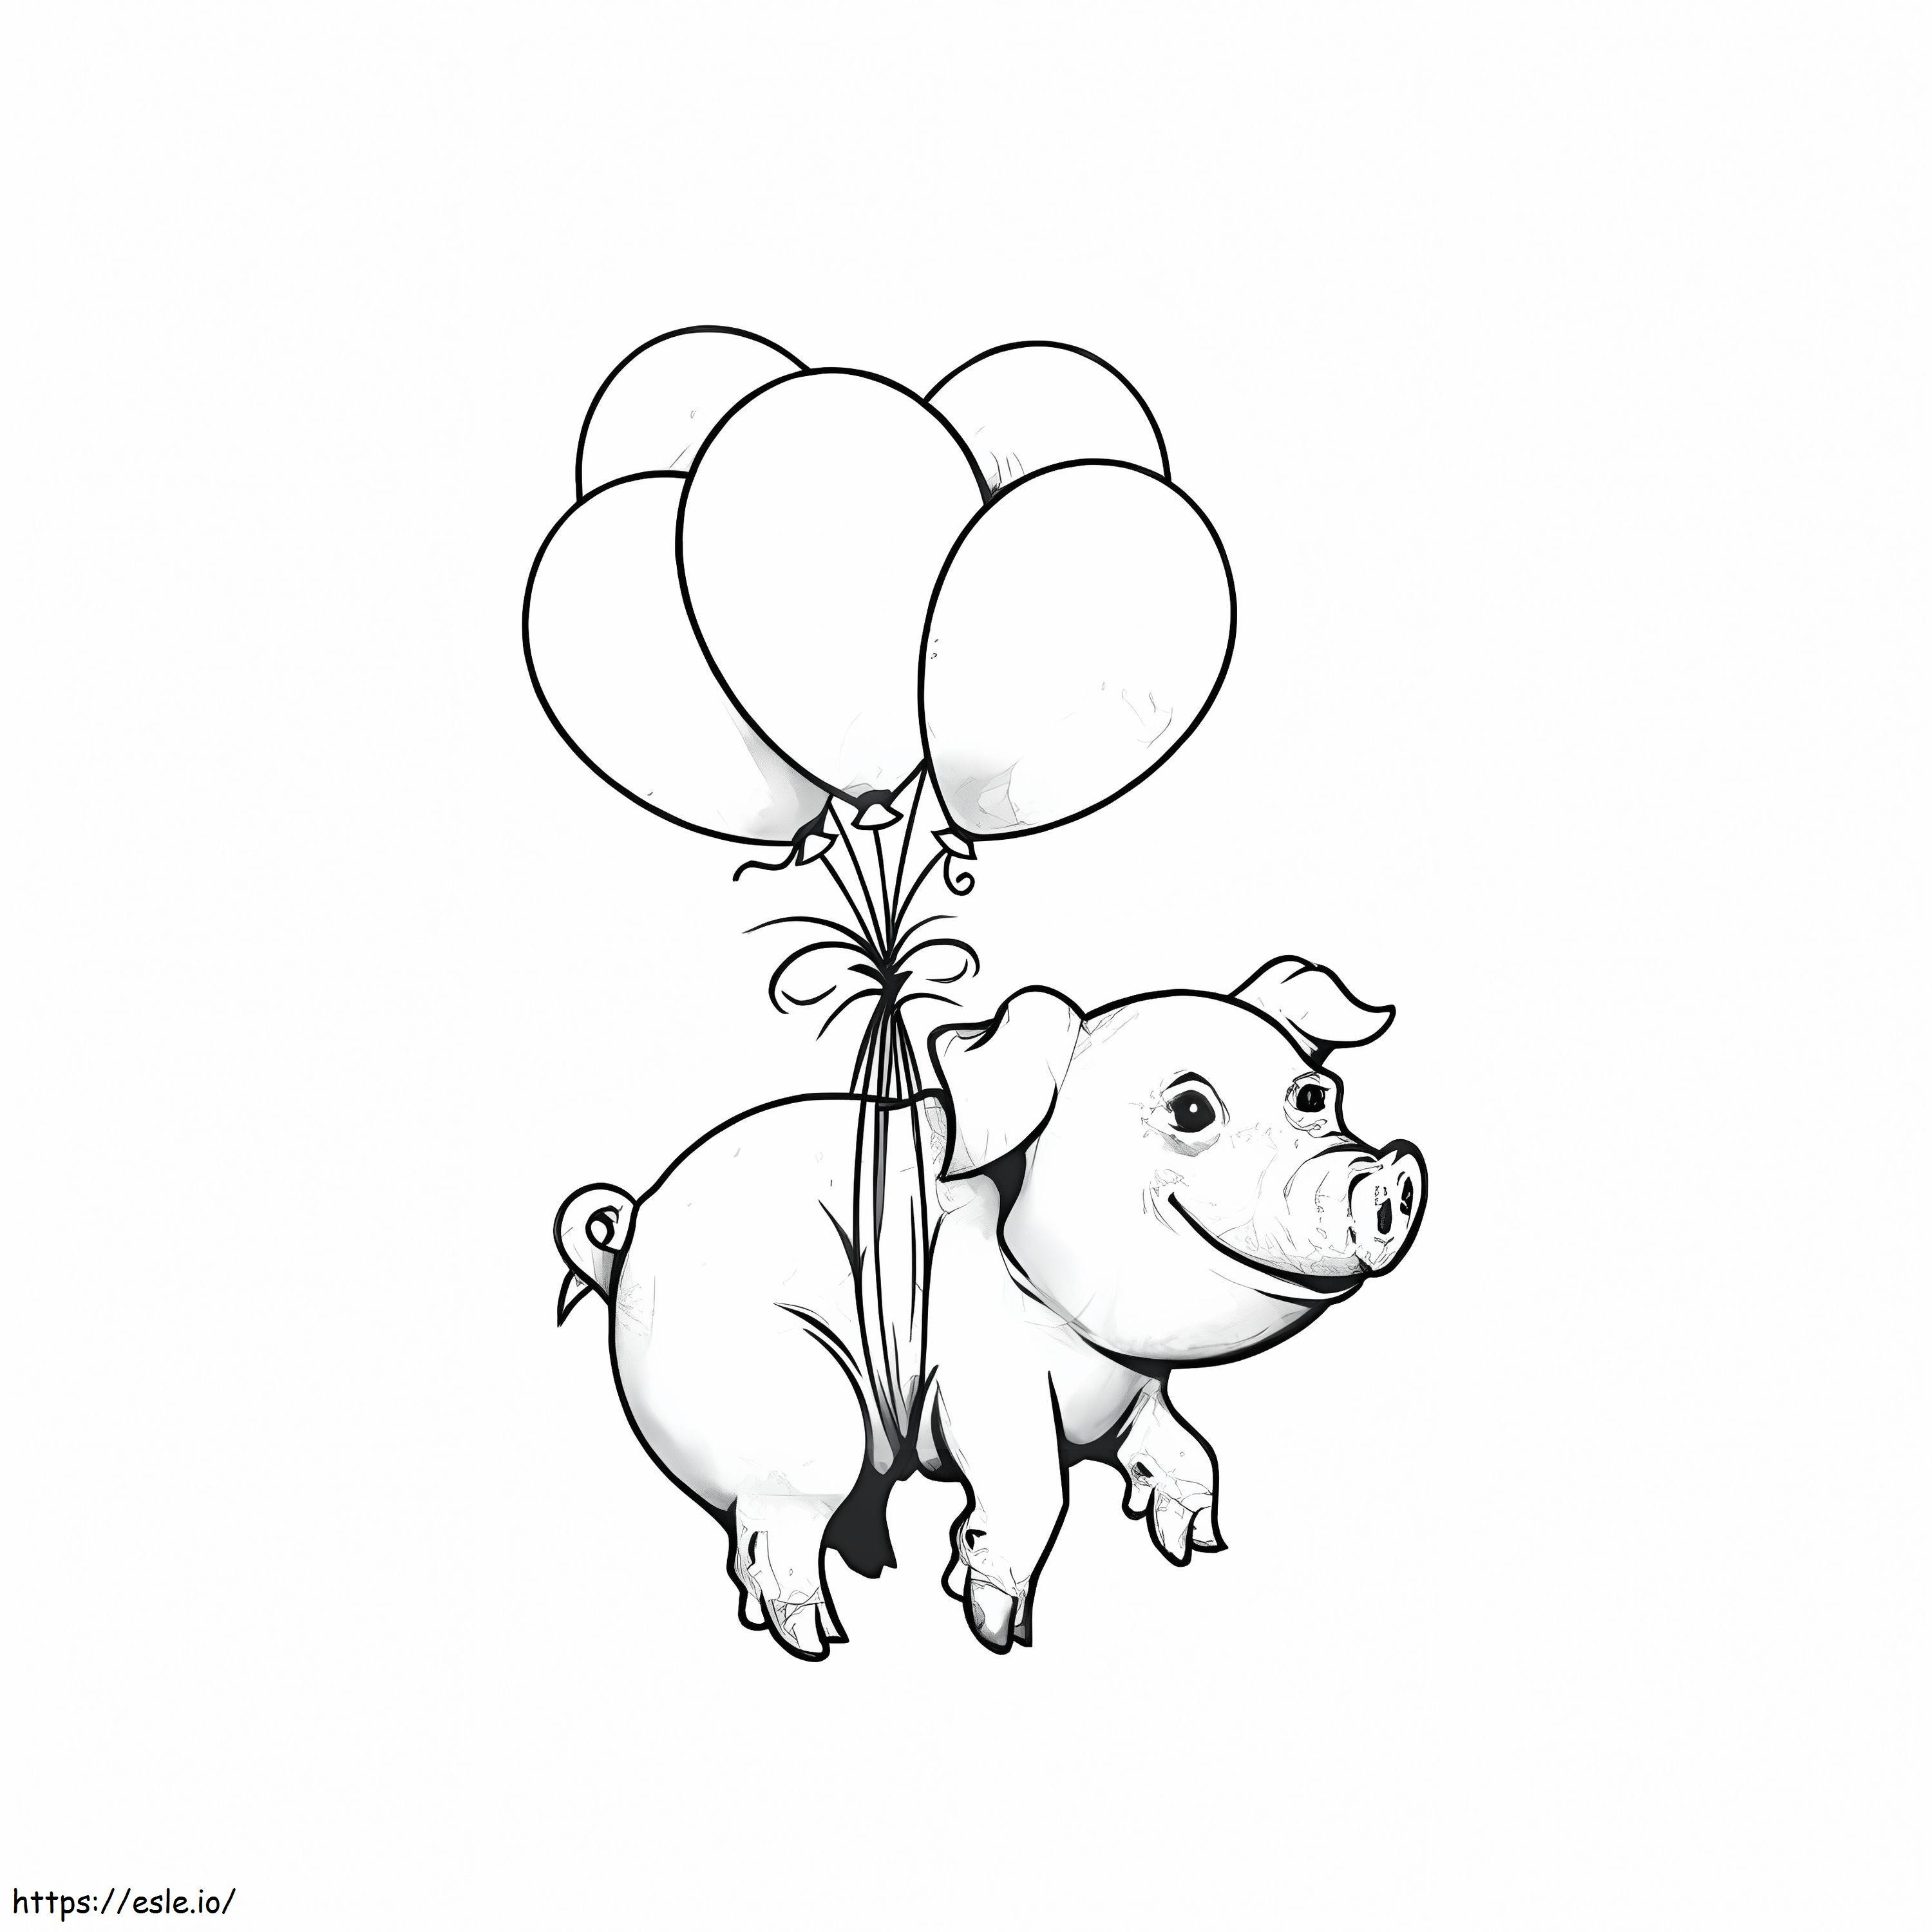 Tattooed Pig With Balloons coloring page